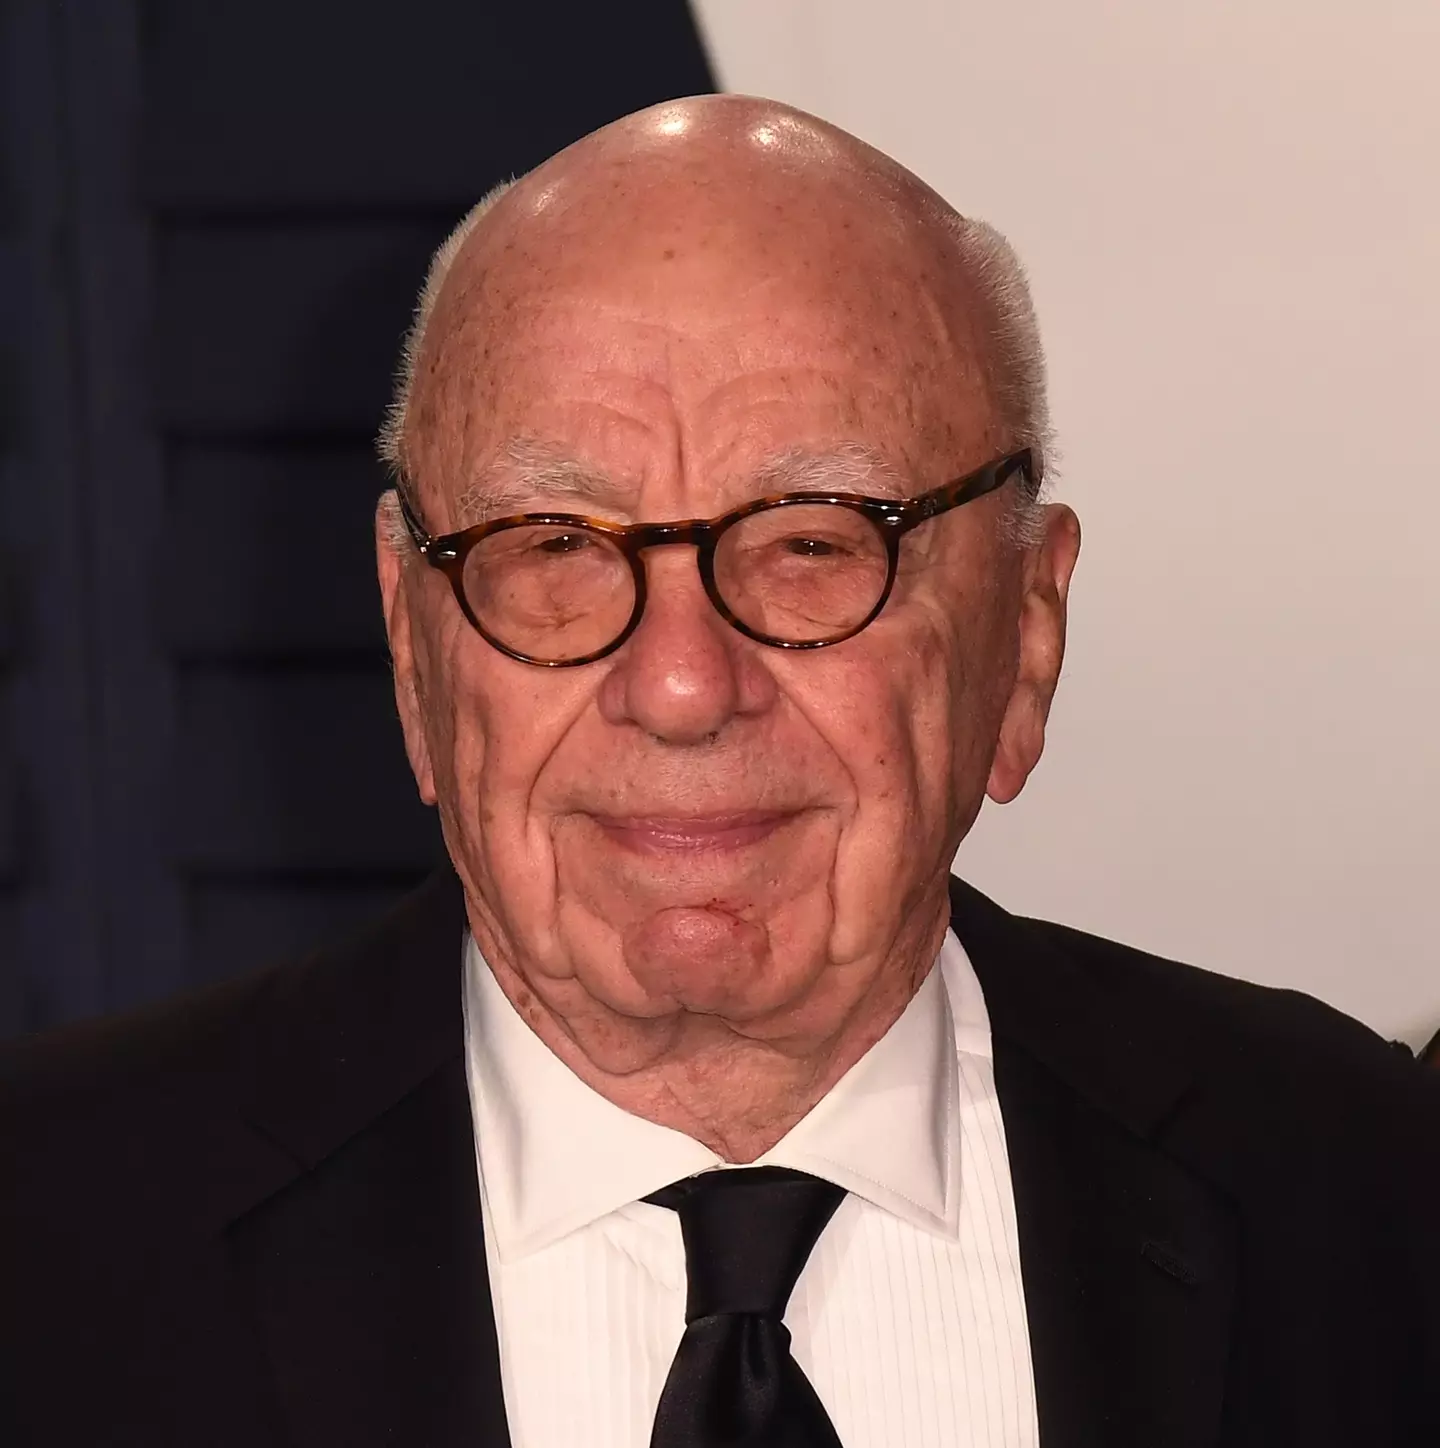 Vanity Fair reports that Rupert Murdoch ended his six year marriage to Jerry Hall in one email.